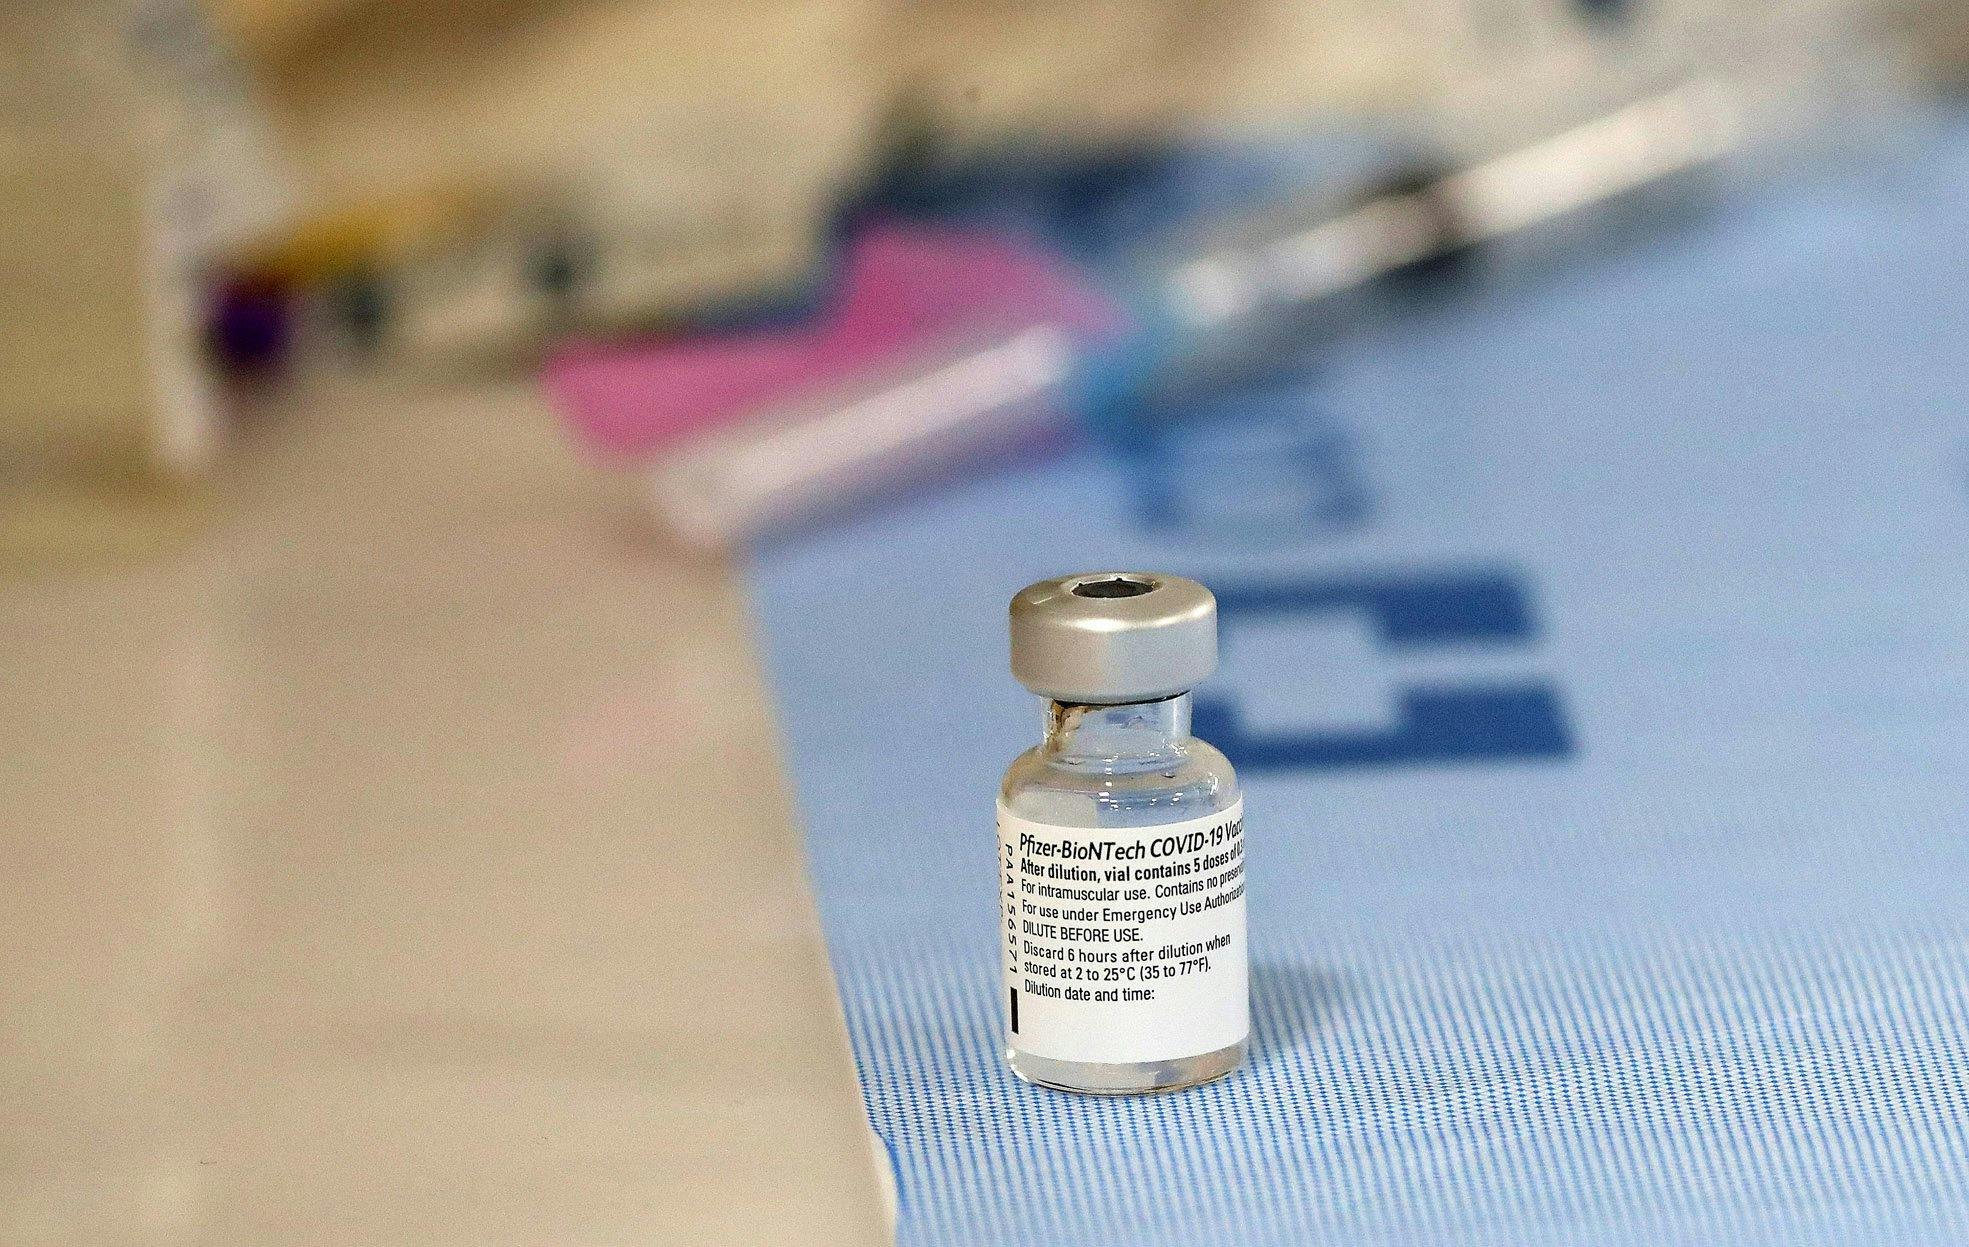 Toronto to continue ‘wartime effort’ of vaccinating through the holidays